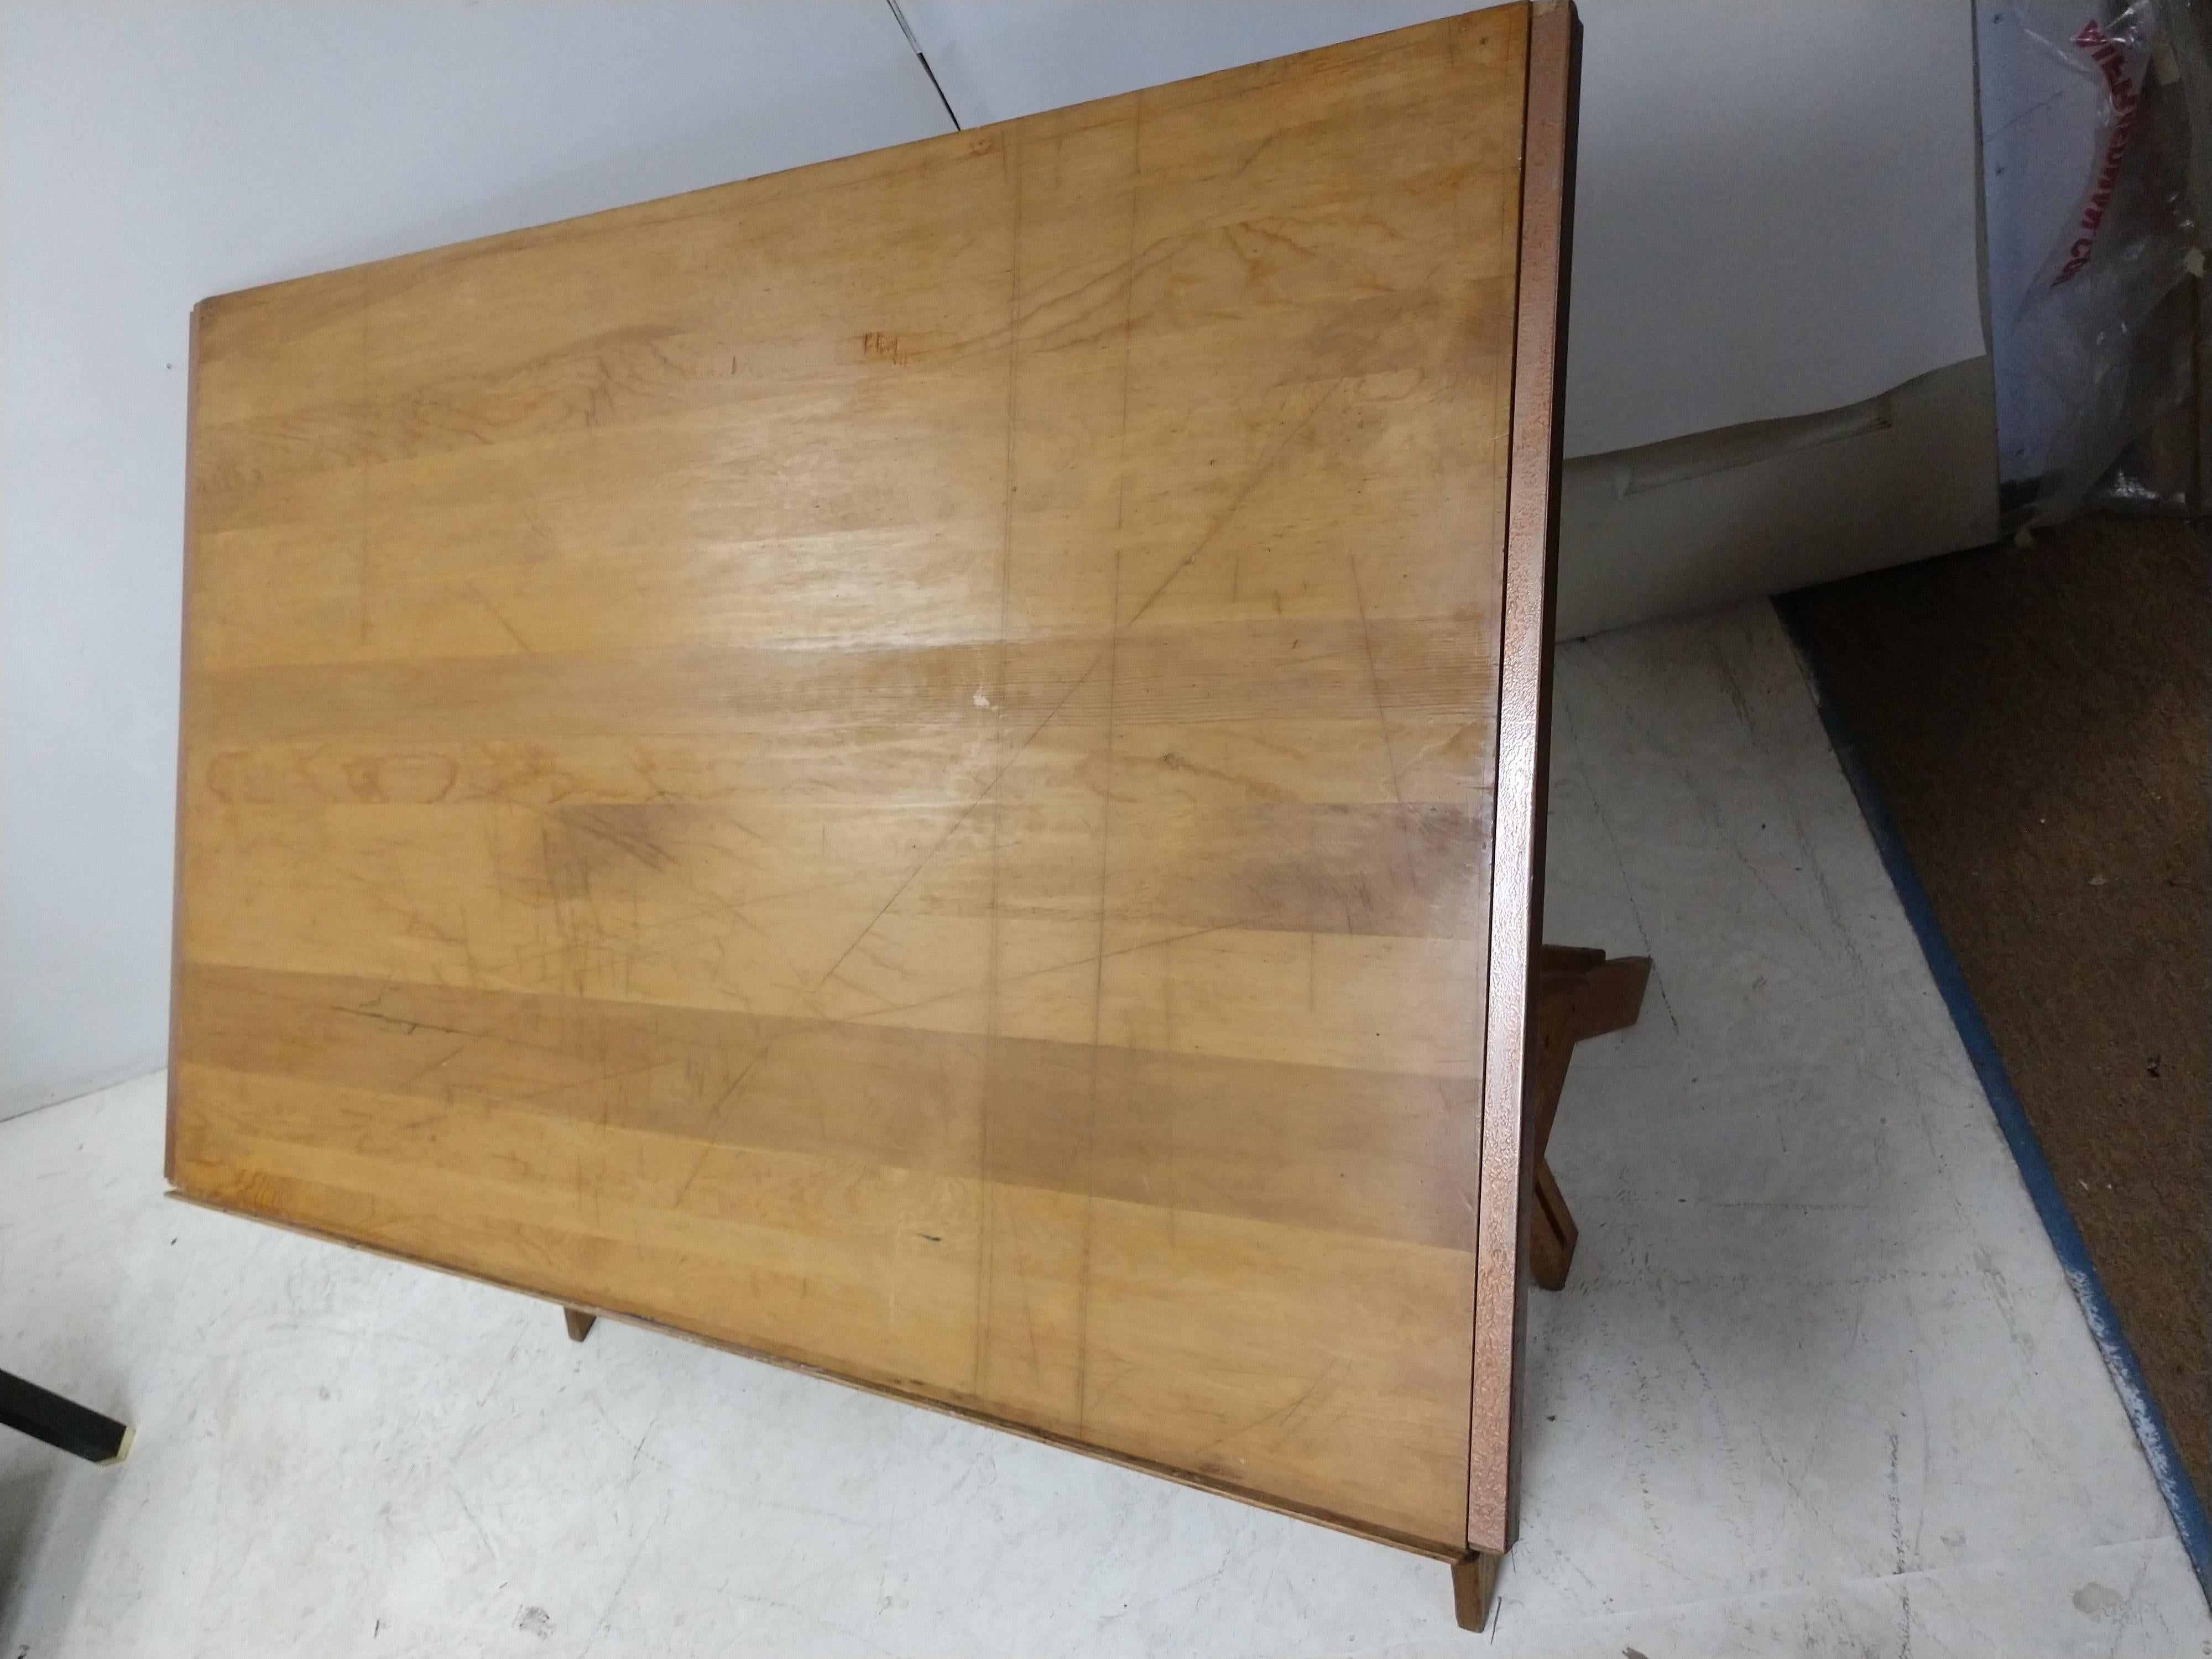 Large (top is 38.5 x 60) maple top on oak base, (base is 28x 50). Raises from 32 to a height of 42 flat. Tilts to any angle. In excellent vintage condition with minor wear to the top. Top unbolts for transporting. Works perfectly.